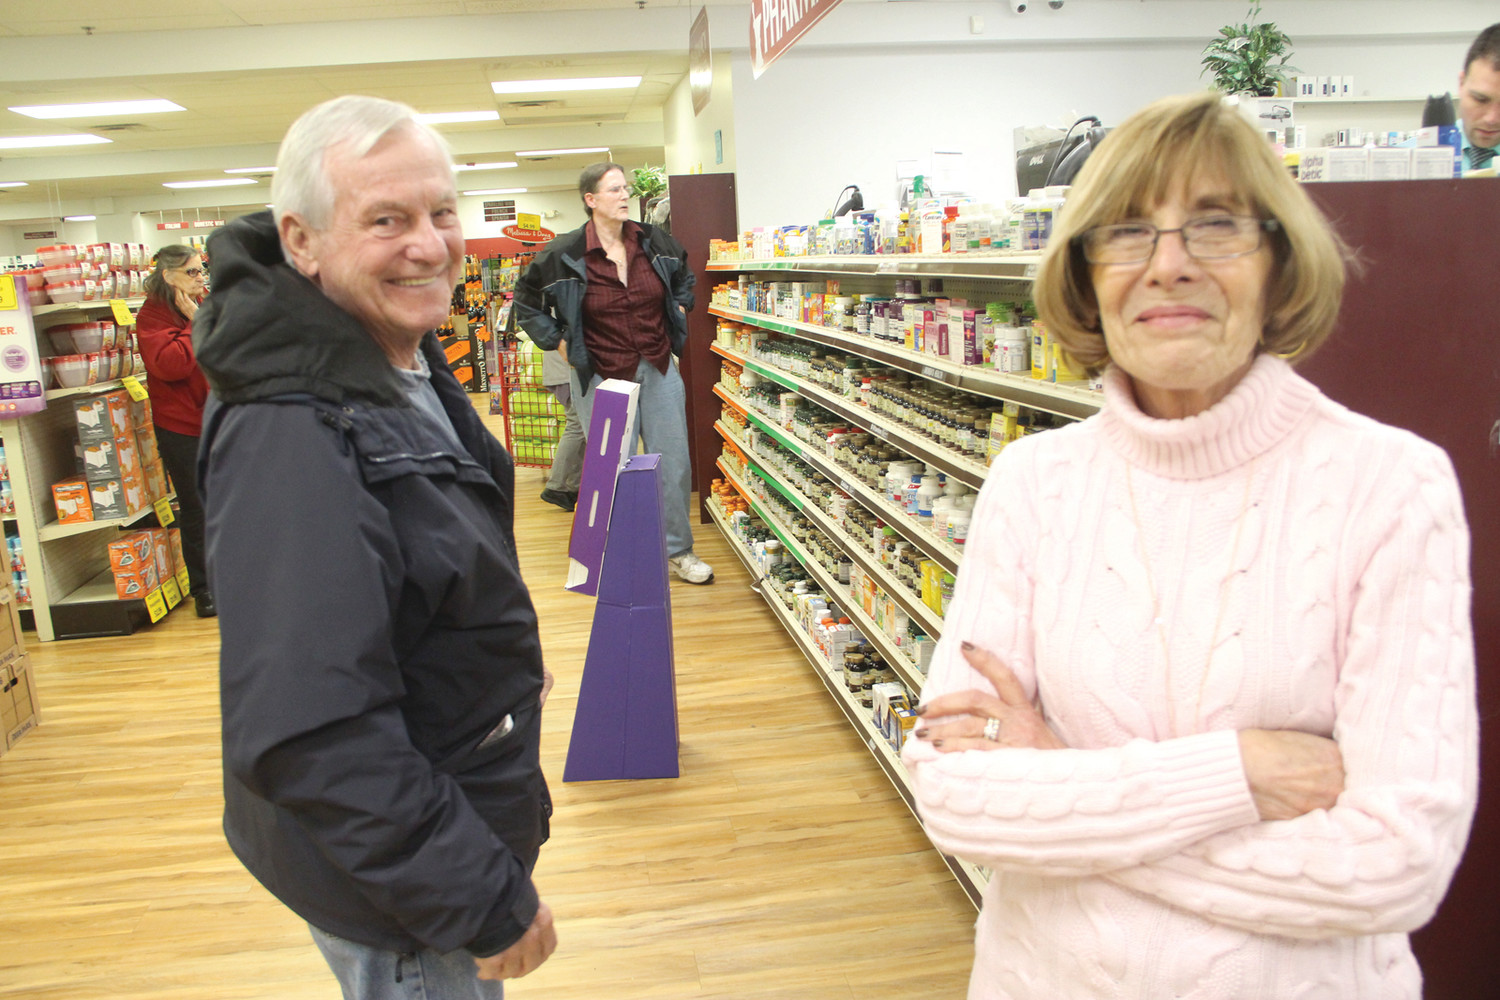 LIKE FAMILY: Jean Ricci, who has worked at Phred’s Drug for 38 years, talks with Teddy Scripsack in the store Tuesday. A retired Cranston firefighter now living in Barrington, Scripsack still comes to Phred’s.